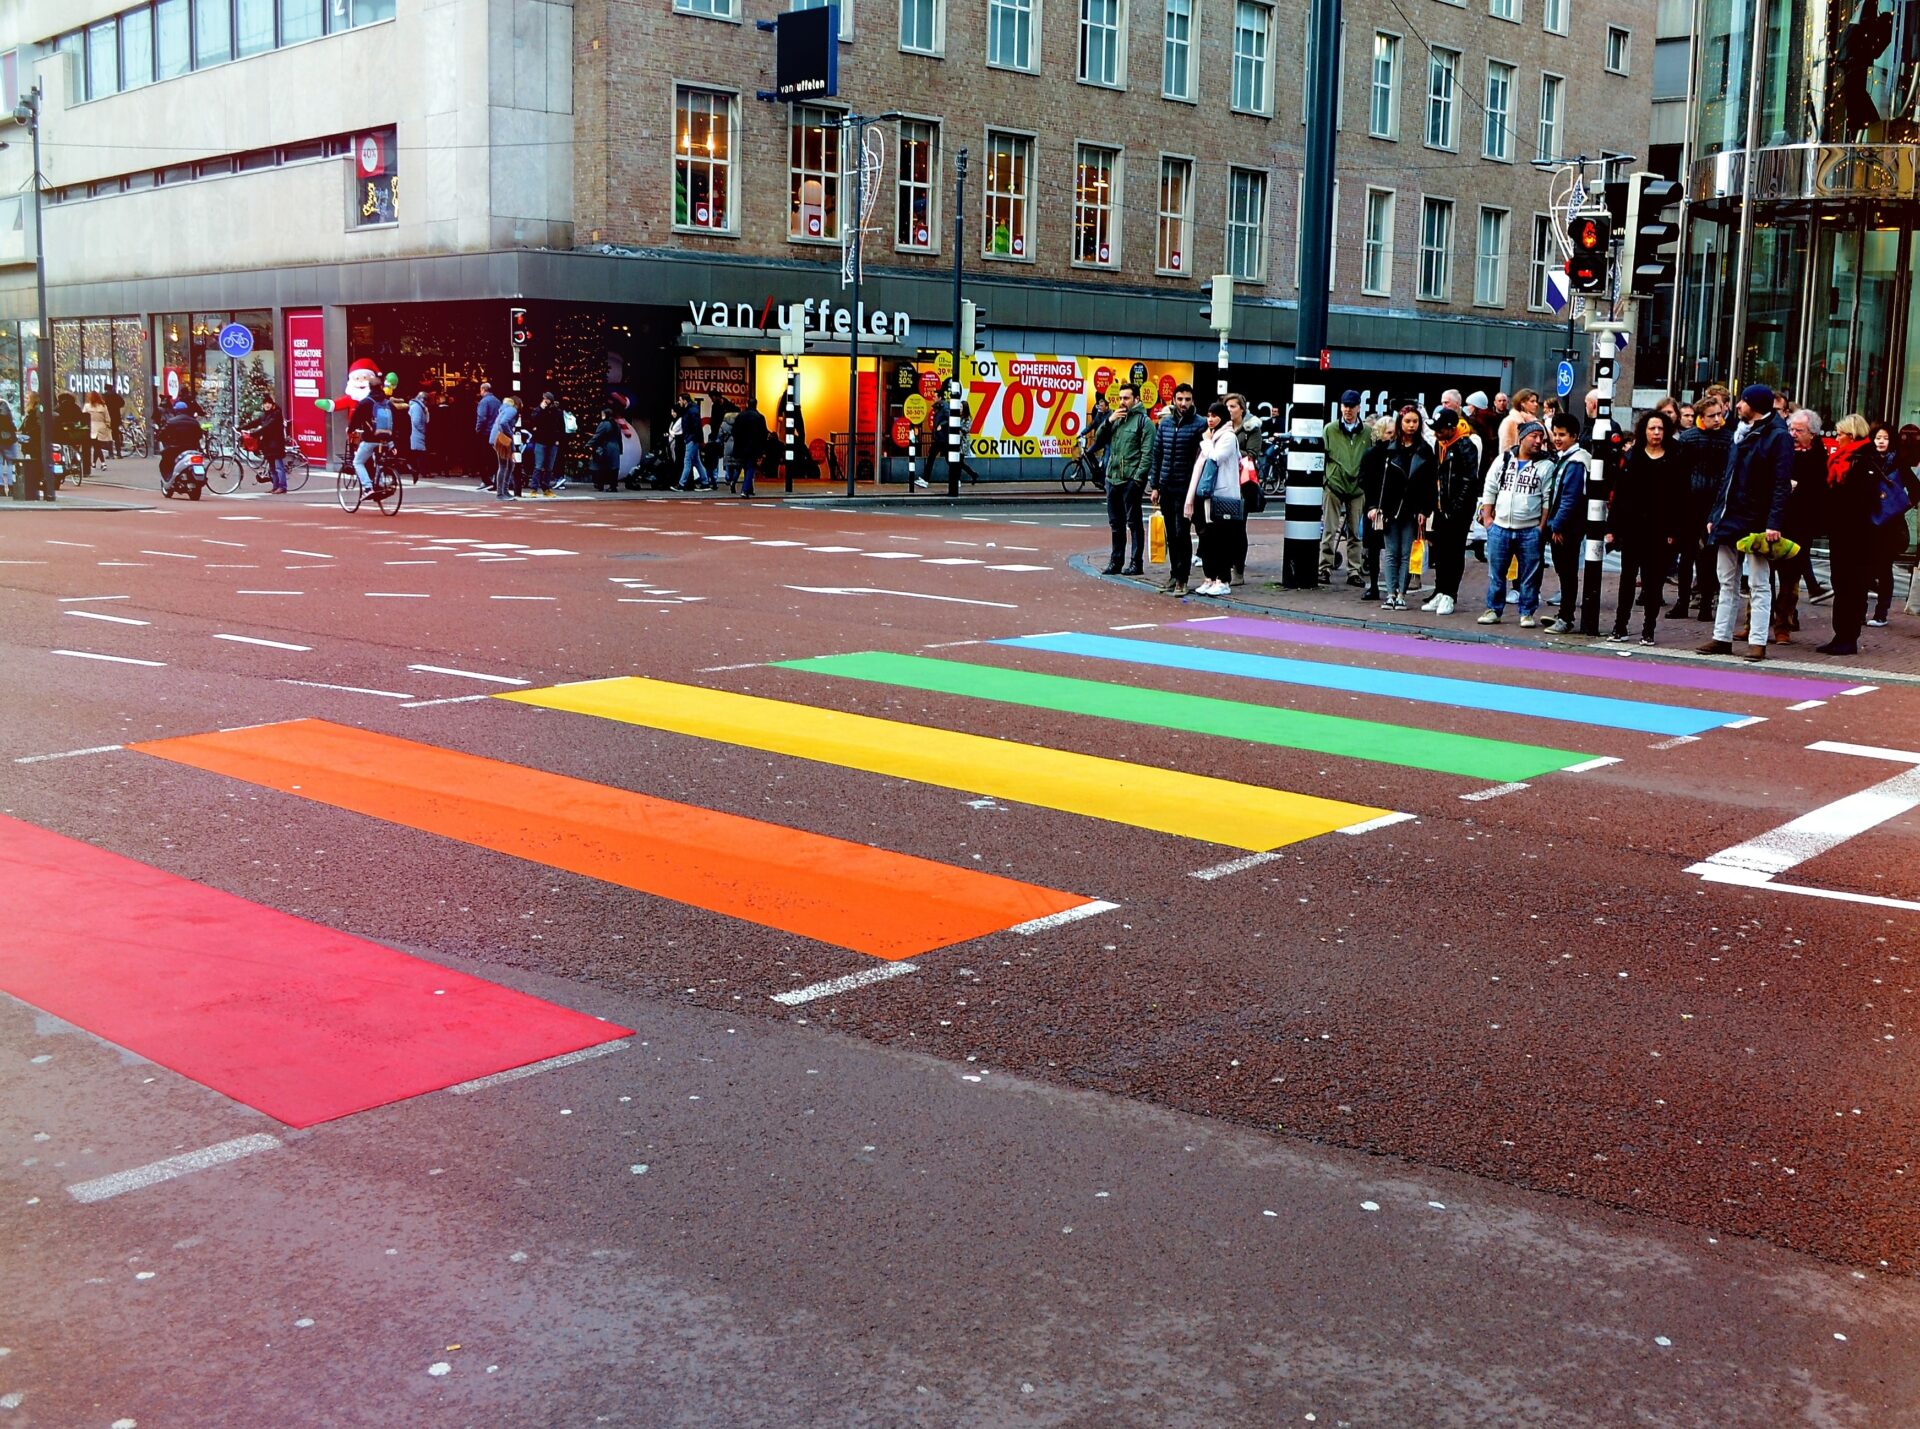 An urban commercial road where many people are waiting to walk on coloured crossing lines